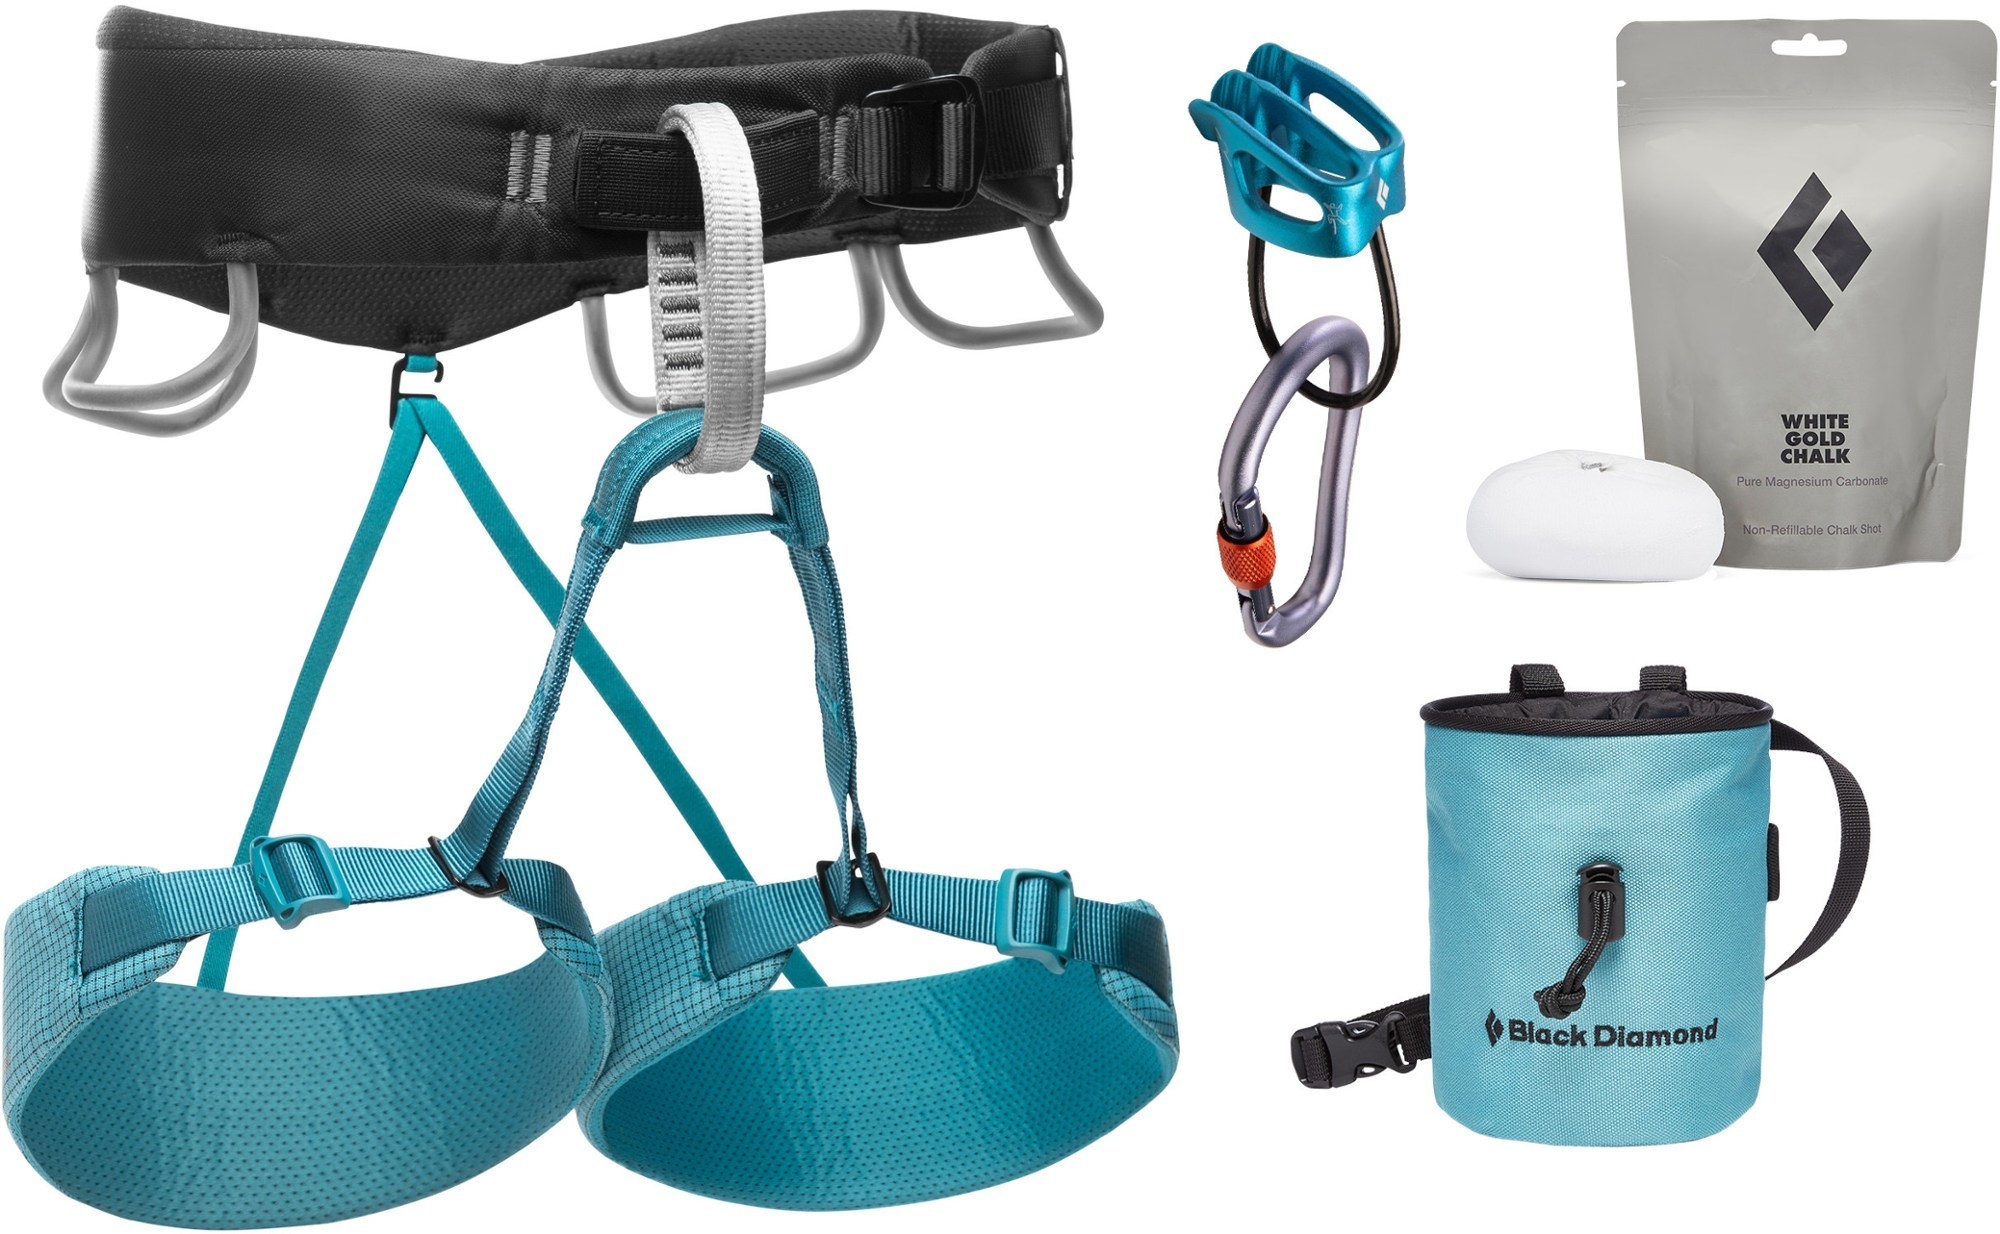 the teal and black women&#x27;s climbing harness and the set